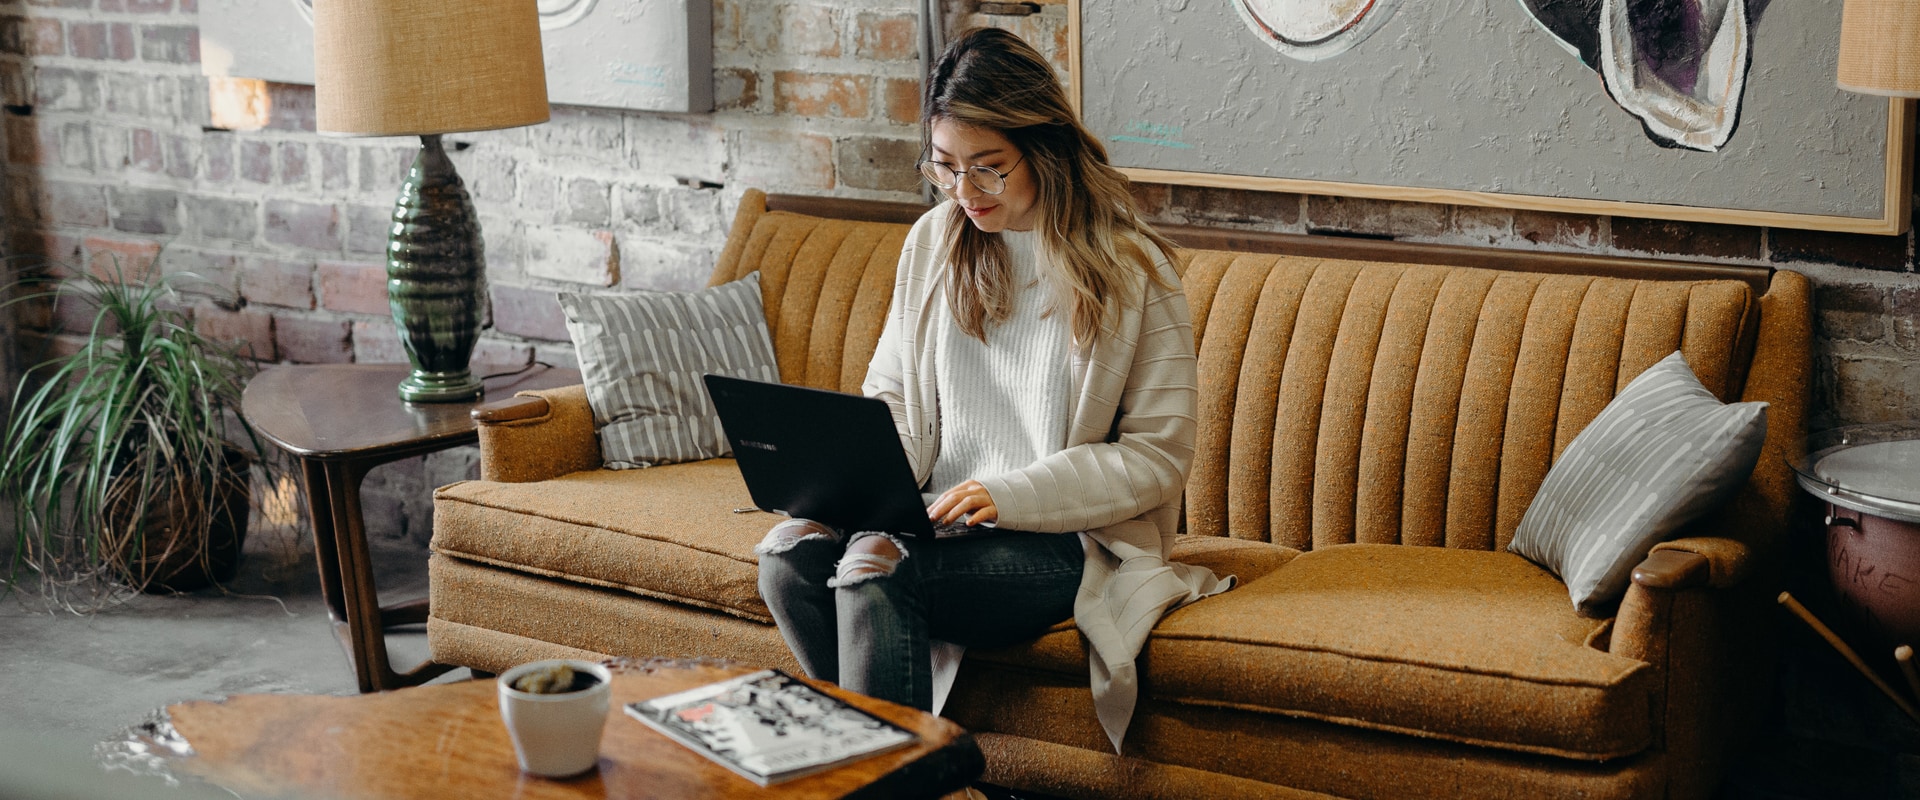 Woman sitting on couch using laptop